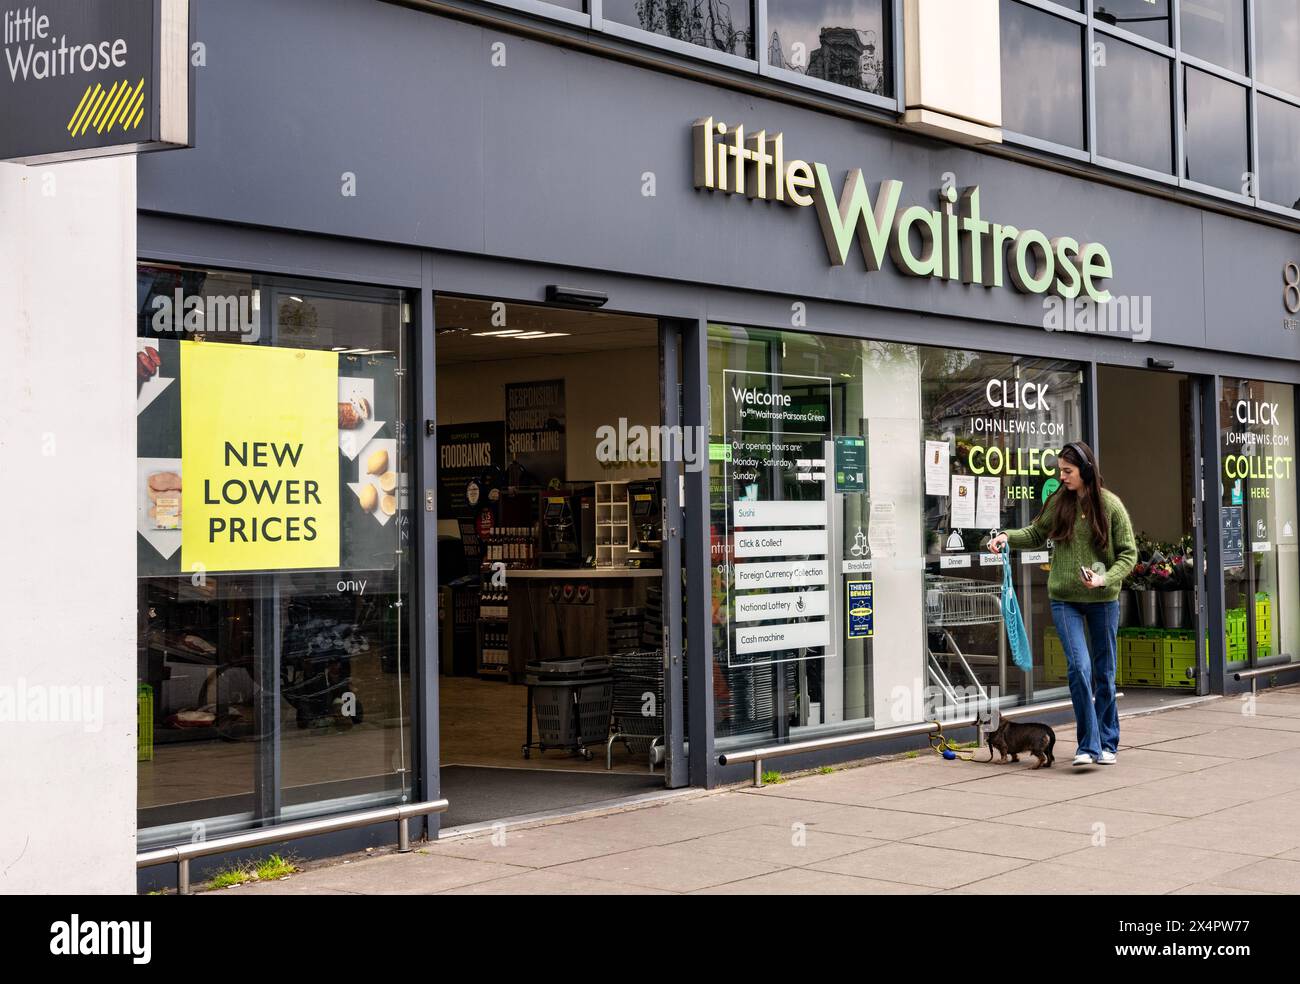 A Little Waitrose outlet in Parsons Green, West London Stock Photo